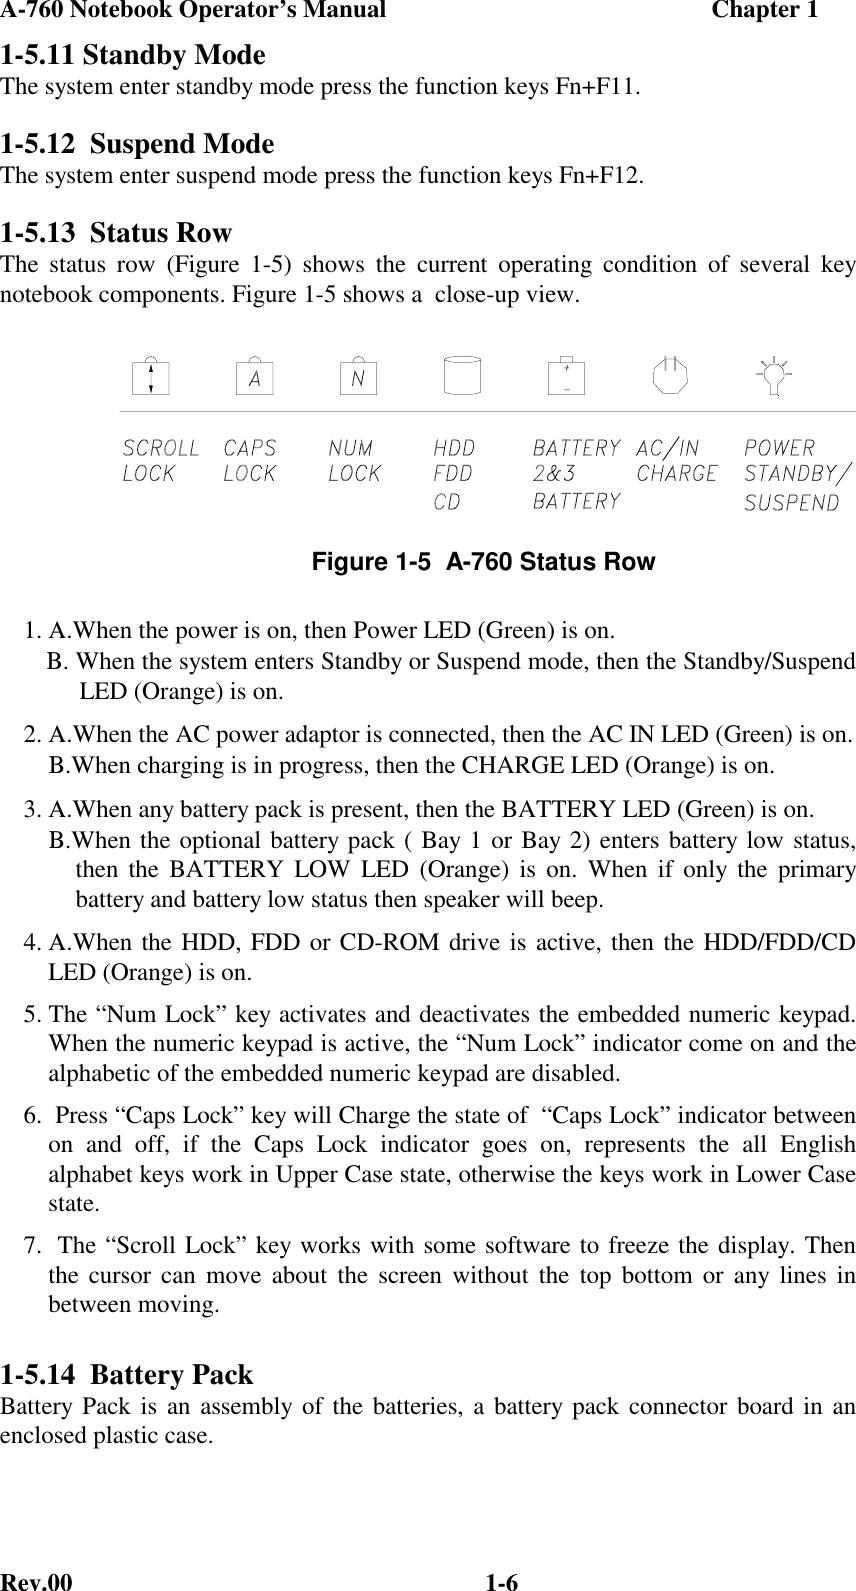 A-760 Notebook Operator’s Manual                                                    Chapter 1Rev.00 1-61-5.11 Standby ModeThe system enter standby mode press the function keys Fn+F11.1-5.12  Suspend ModeThe system enter suspend mode press the function keys Fn+F12.1-5.13  Status RowThe status row (Figure 1-5) shows the current operating condition of several keynotebook components. Figure 1-5 shows a  close-up view.1. Α.When the power is on, then Power LED (Green) is on.   Β. When the system enters Standby or Suspend mode, then the Standby/Suspend     LED (Orange) is on.2. Α.When the AC power adaptor is connected, then the AC IN LED (Green) is on.    Β.When charging is in progress, then the CHARGE LED (Orange) is on.3. Α.When any battery pack is present, then the BATTERY LED (Green) is on.    Β.When the optional battery pack ( Bay 1 or Bay 2) enters battery low status,     then the BATTERY LOW LED (Orange) is on. When if only the primary     battery and battery low status then speaker will beep.4. Α.When the HDD, FDD or CD-ROM drive is active, then the HDD/FDD/CDLED (Orange) is on.5. The “Num Lock” key activates and deactivates the embedded numeric keypad.When the numeric keypad is active, the “Num Lock” indicator come on and thealphabetic of the embedded numeric keypad are disabled.6.  Press “Caps Lock” key will Charge the state of  “Caps Lock” indicator betweenon and off, if the Caps Lock indicator goes on, represents the all Englishalphabet keys work in Upper Case state, otherwise the keys work in Lower Casestate.7.  The “Scroll Lock” key works with some software to freeze the display. Thenthe cursor can move about the screen without the top bottom or any lines inbetween moving.1-5.14  Battery PackBattery Pack is an assembly of the batteries, a battery pack connector board in anenclosed plastic case.Figure 1-5  A-760 Status Row